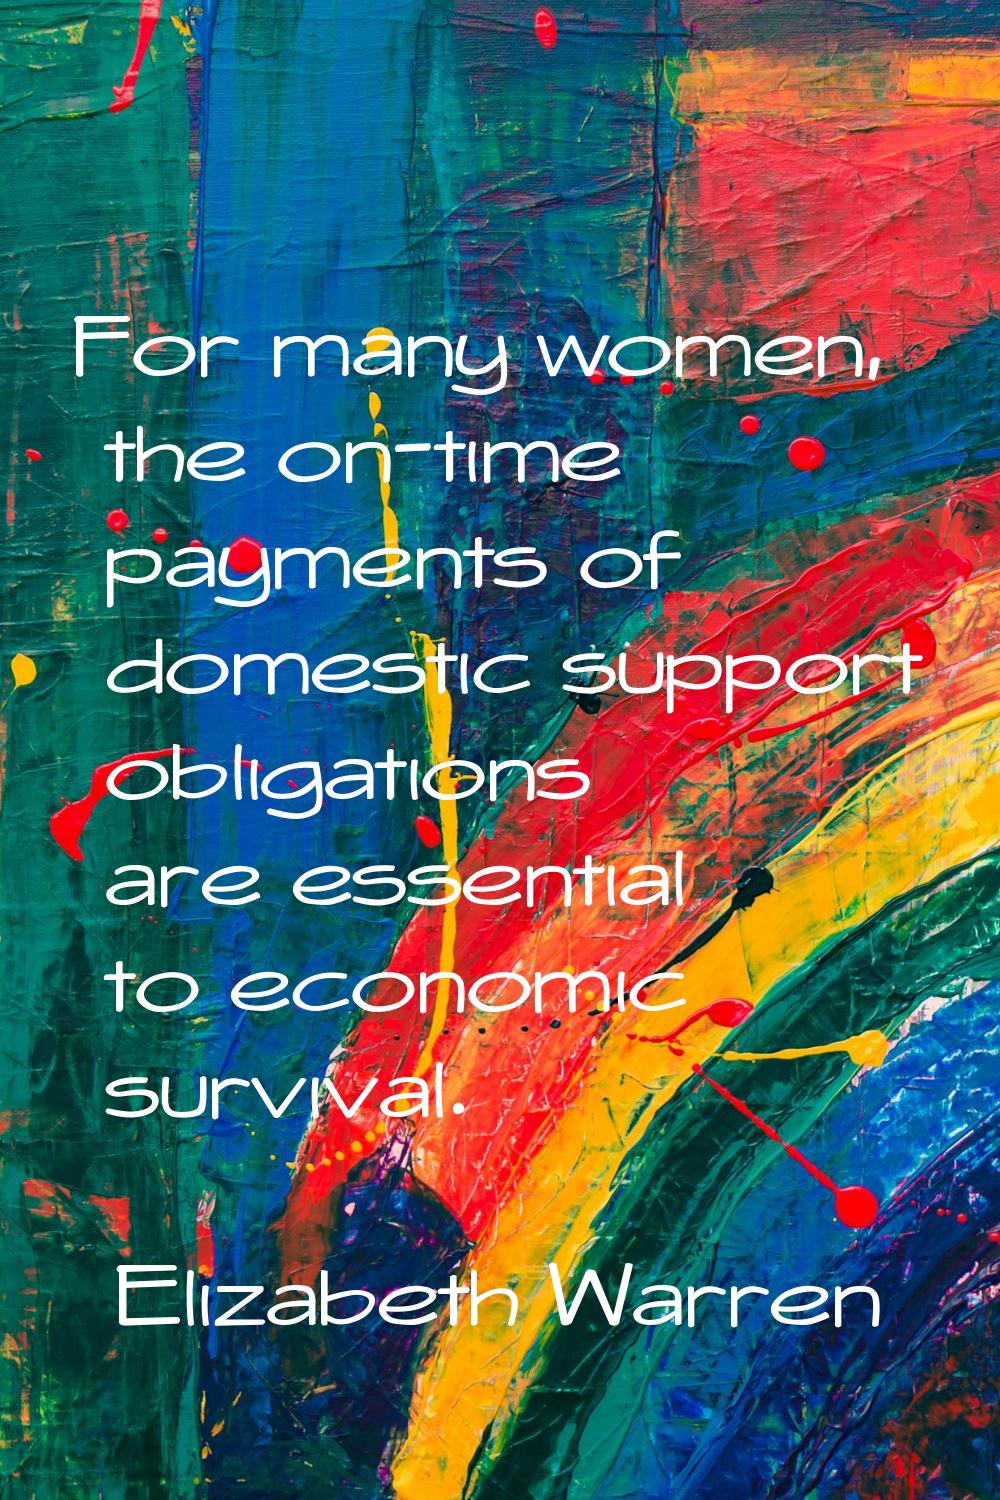 For many women, the on-time payments of domestic support obligations are essential to economic surv